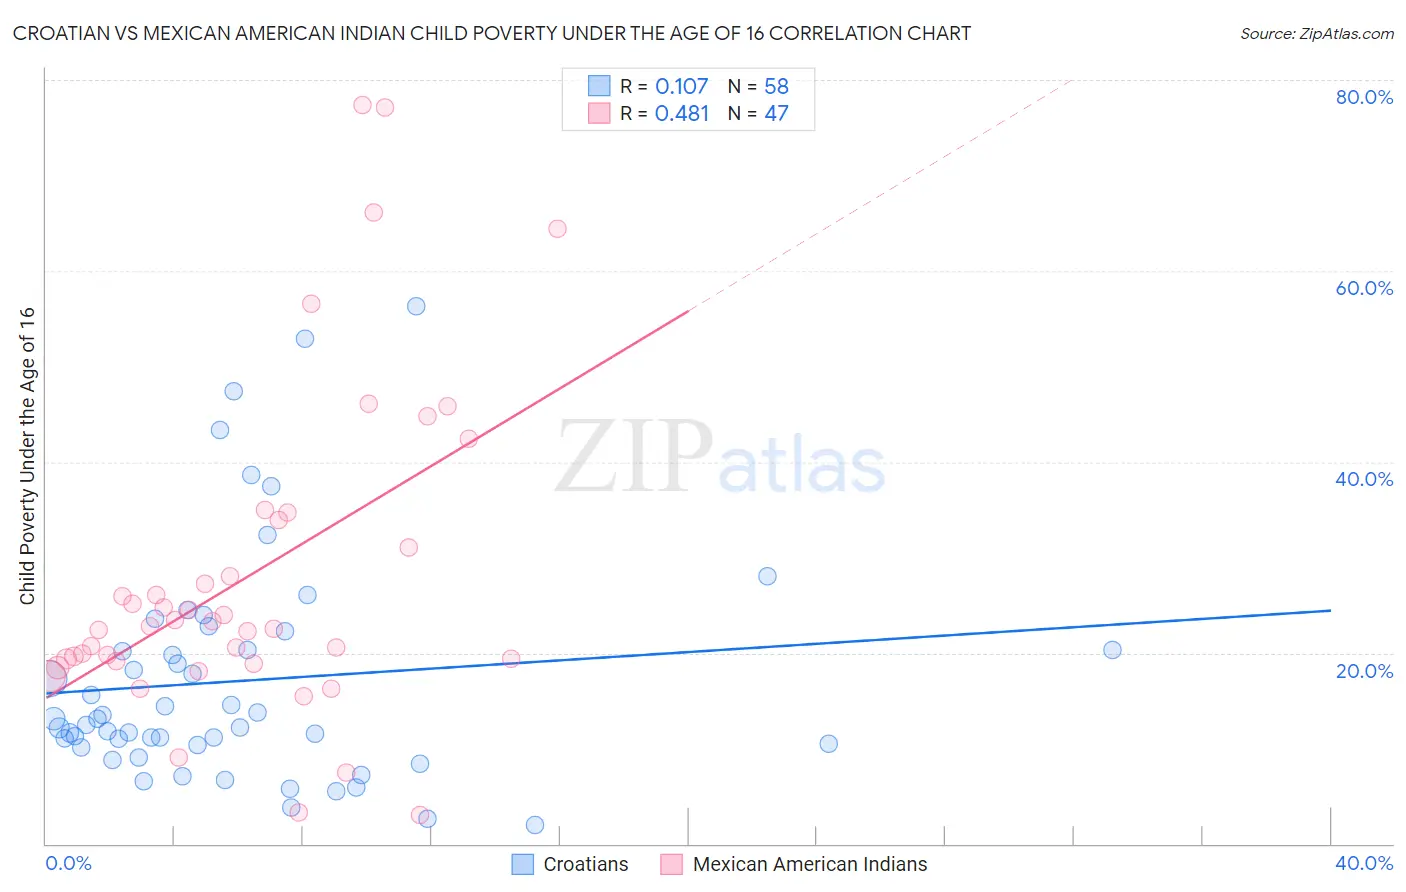 Croatian vs Mexican American Indian Child Poverty Under the Age of 16